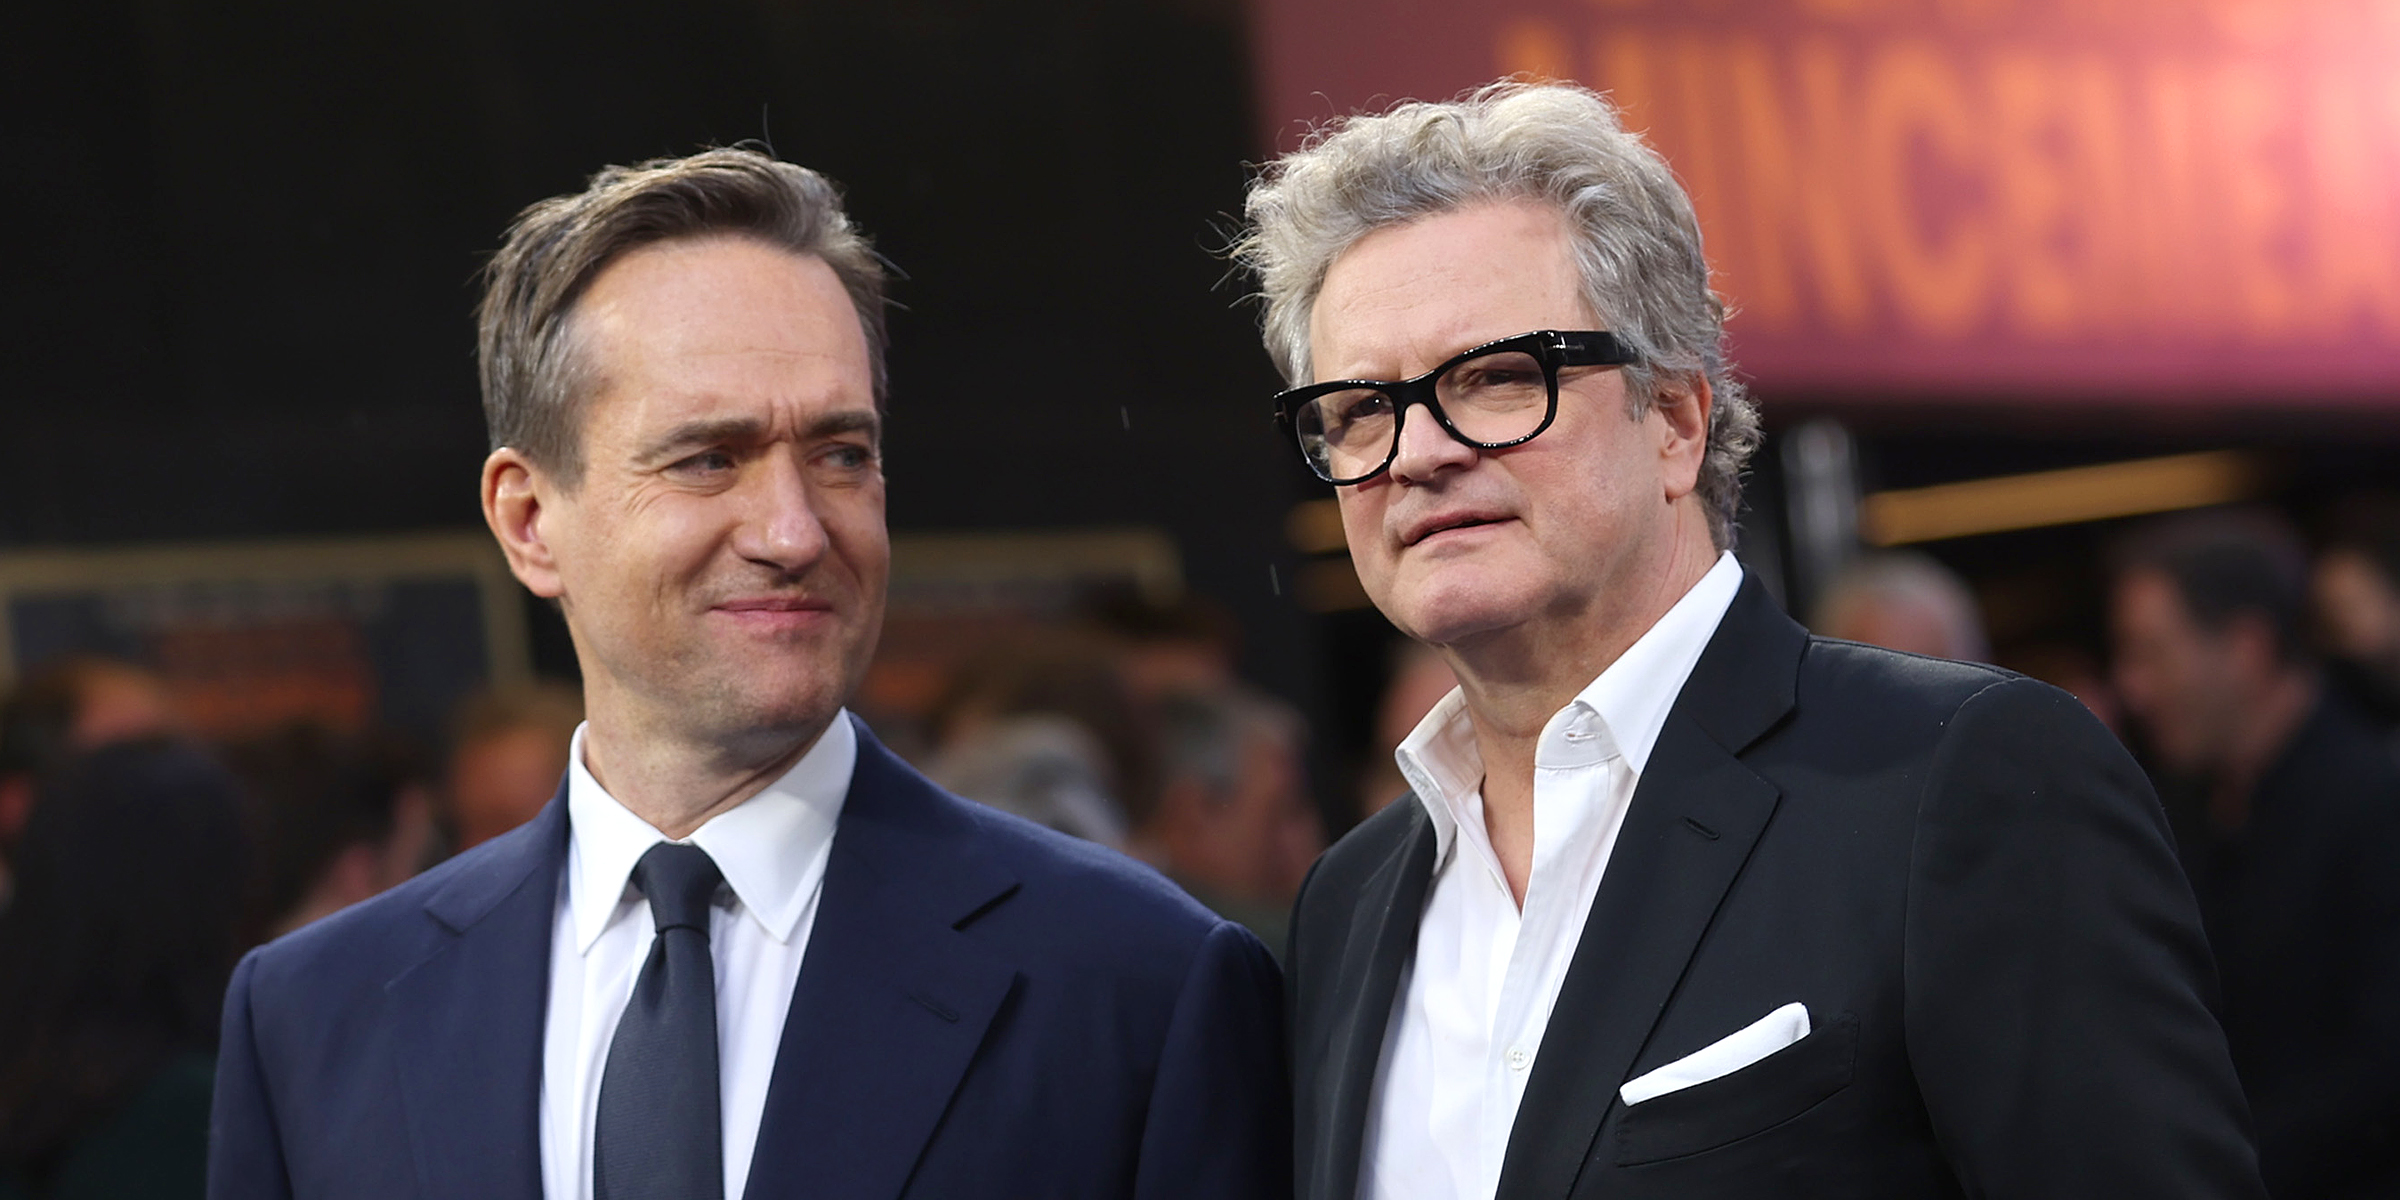 Matthew McFaydan and Colin Firth | Source: Getty Images